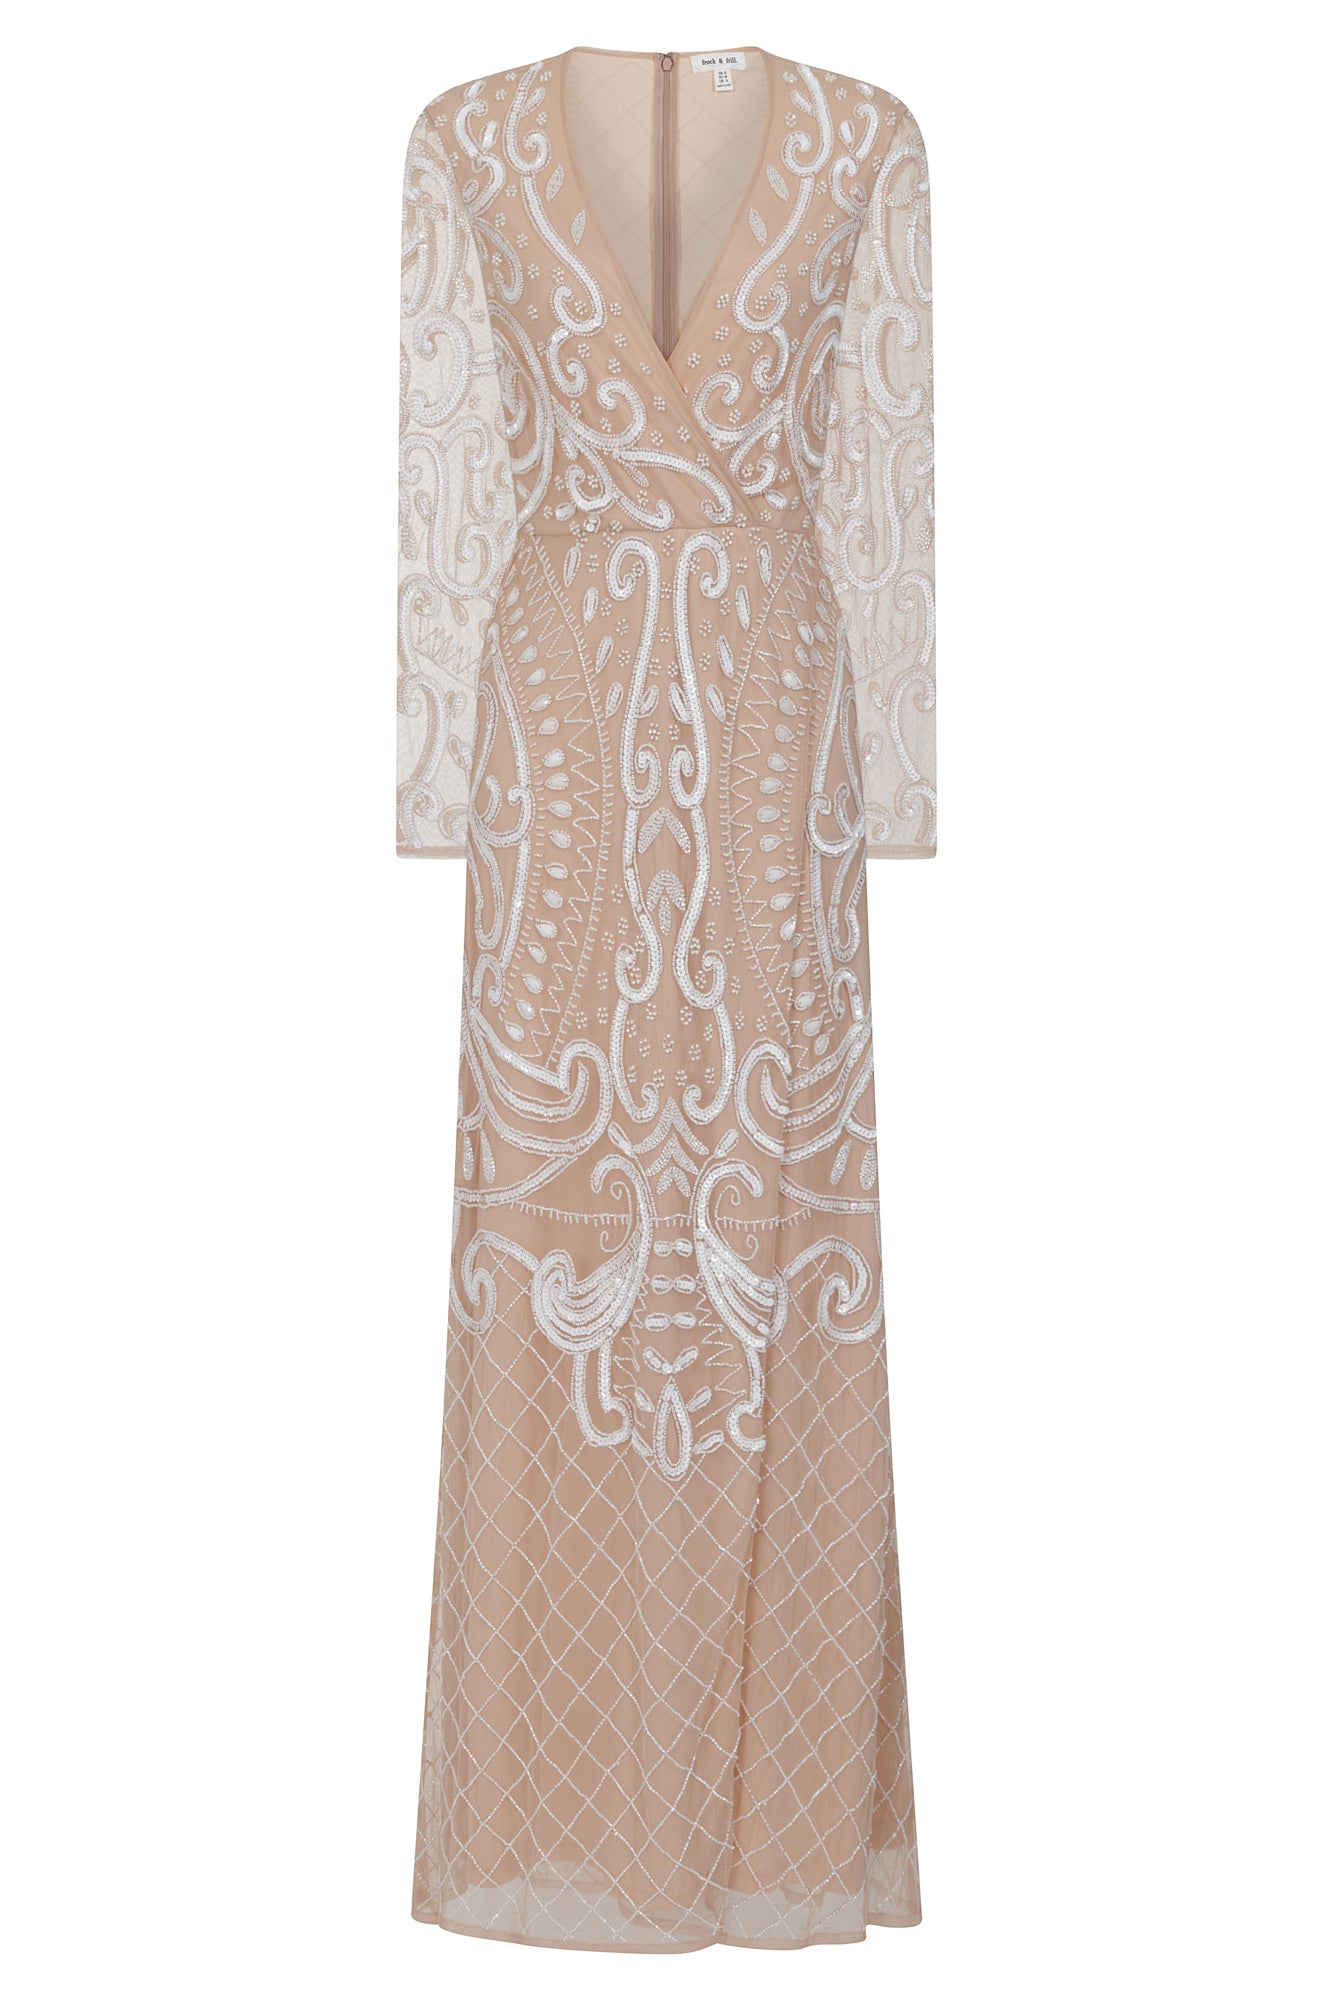 Kambrie Embellished Maxi Dress - Blush Nude – Frock and Frill